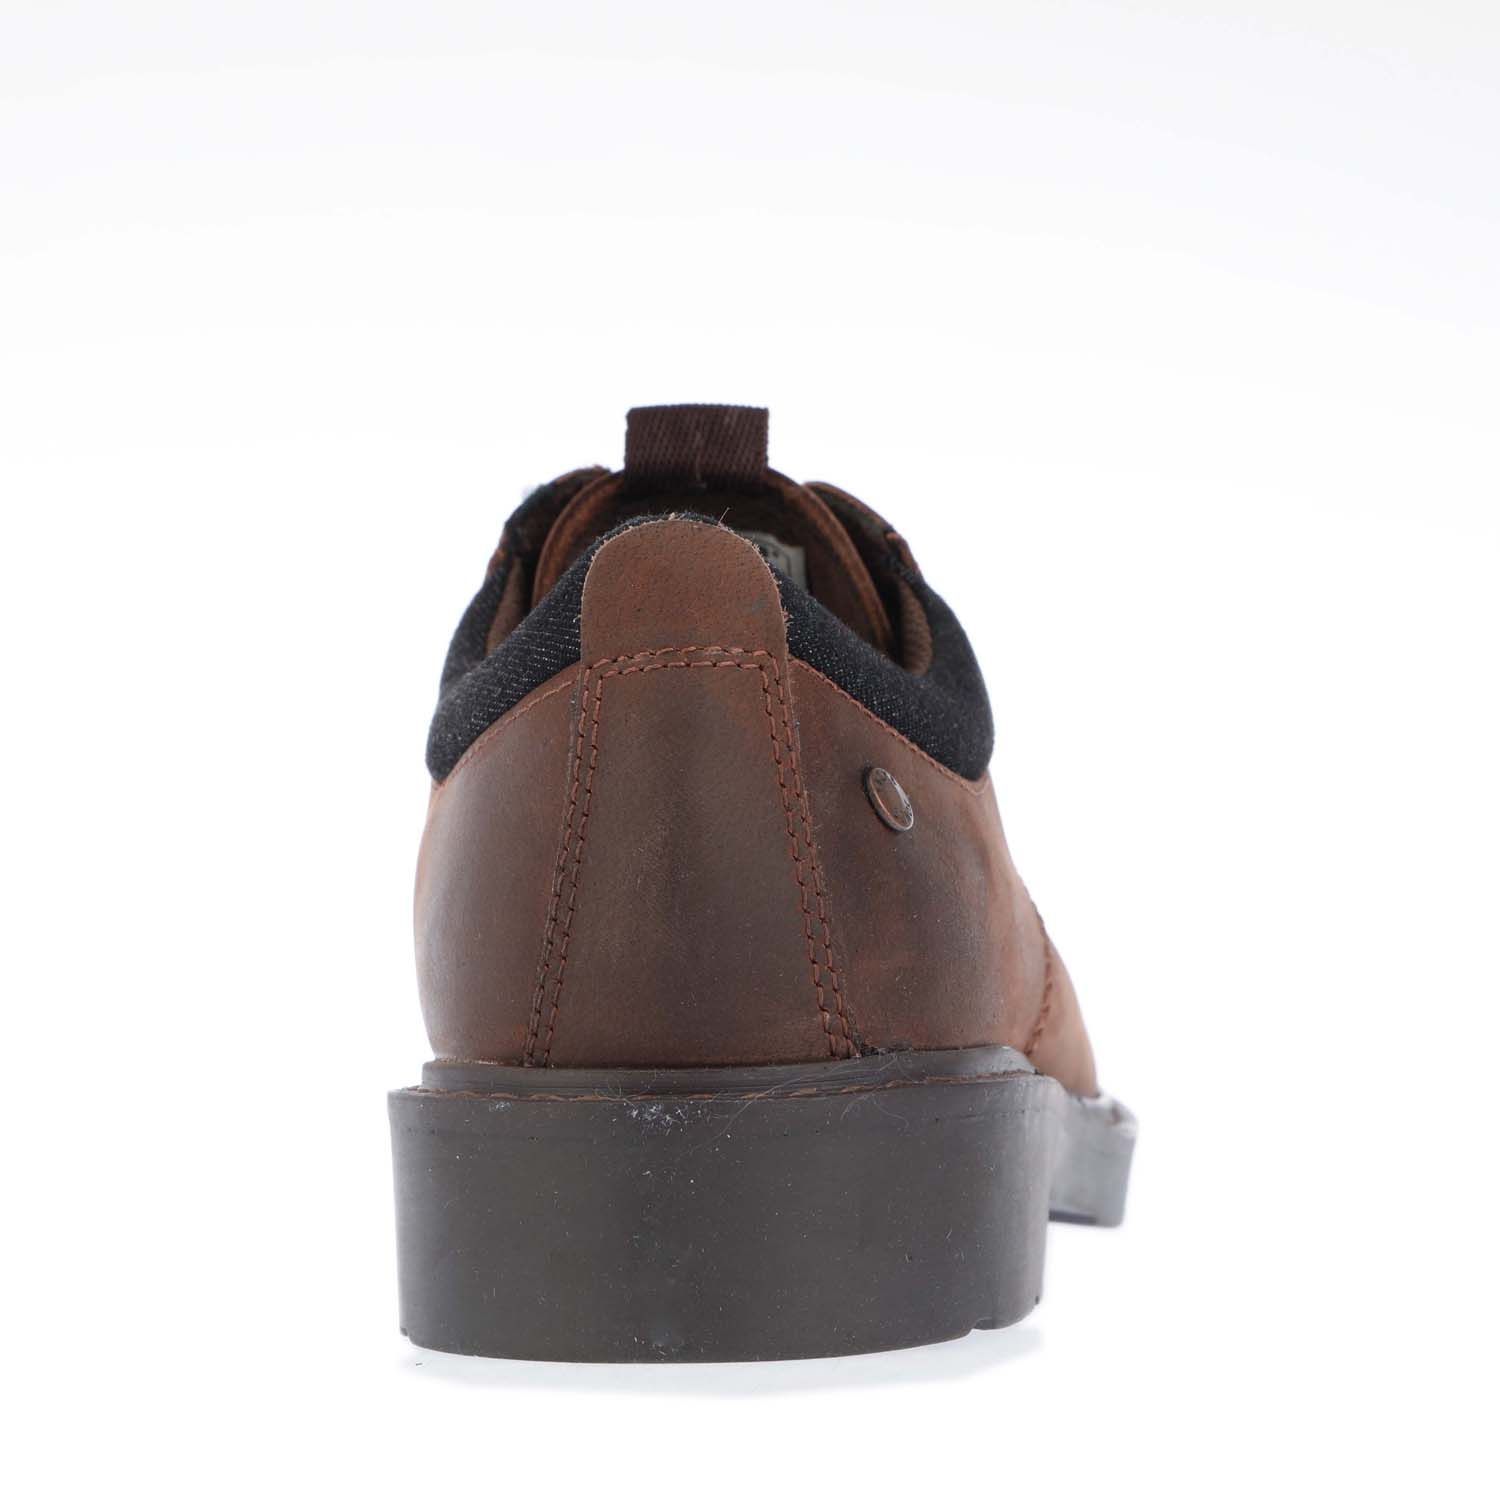 Mens Jack Jones Kimber Shoe in brown.- Leather upper.- Lace closure.- Branding on the tongue.- Rubber sole.- Ref: 12193071